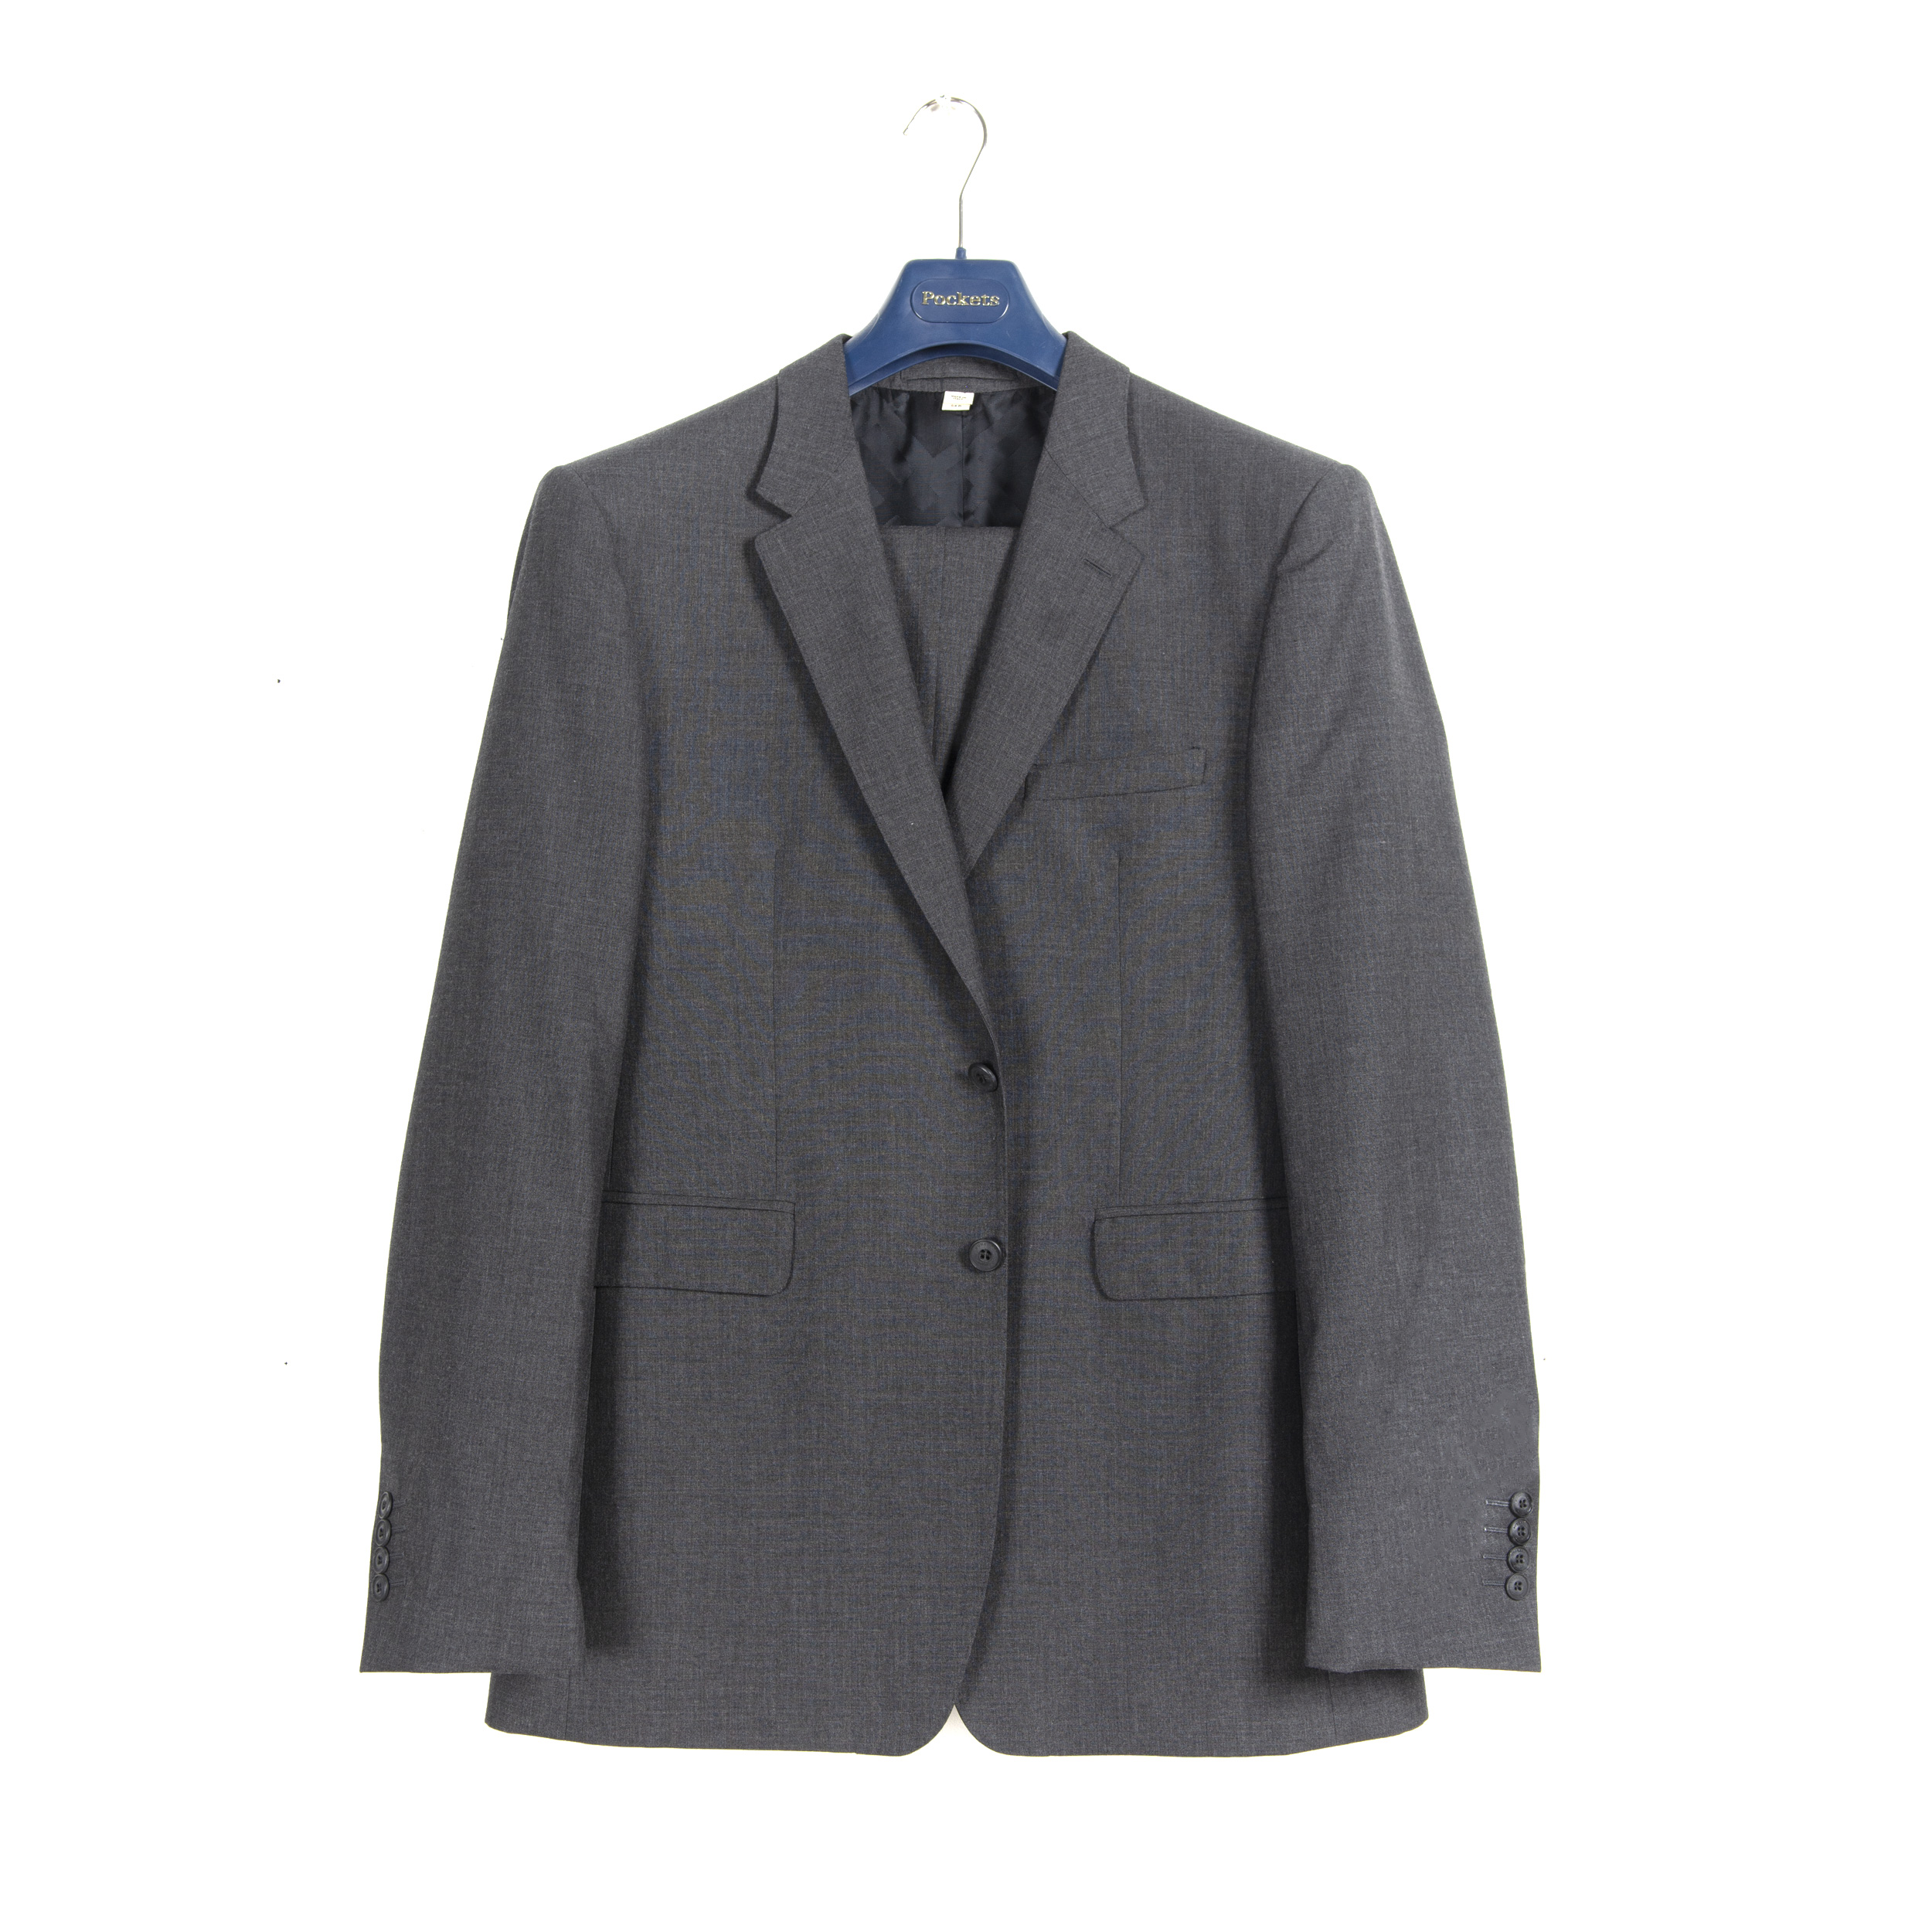 Burberry Millbank Wool Suit Charcoal